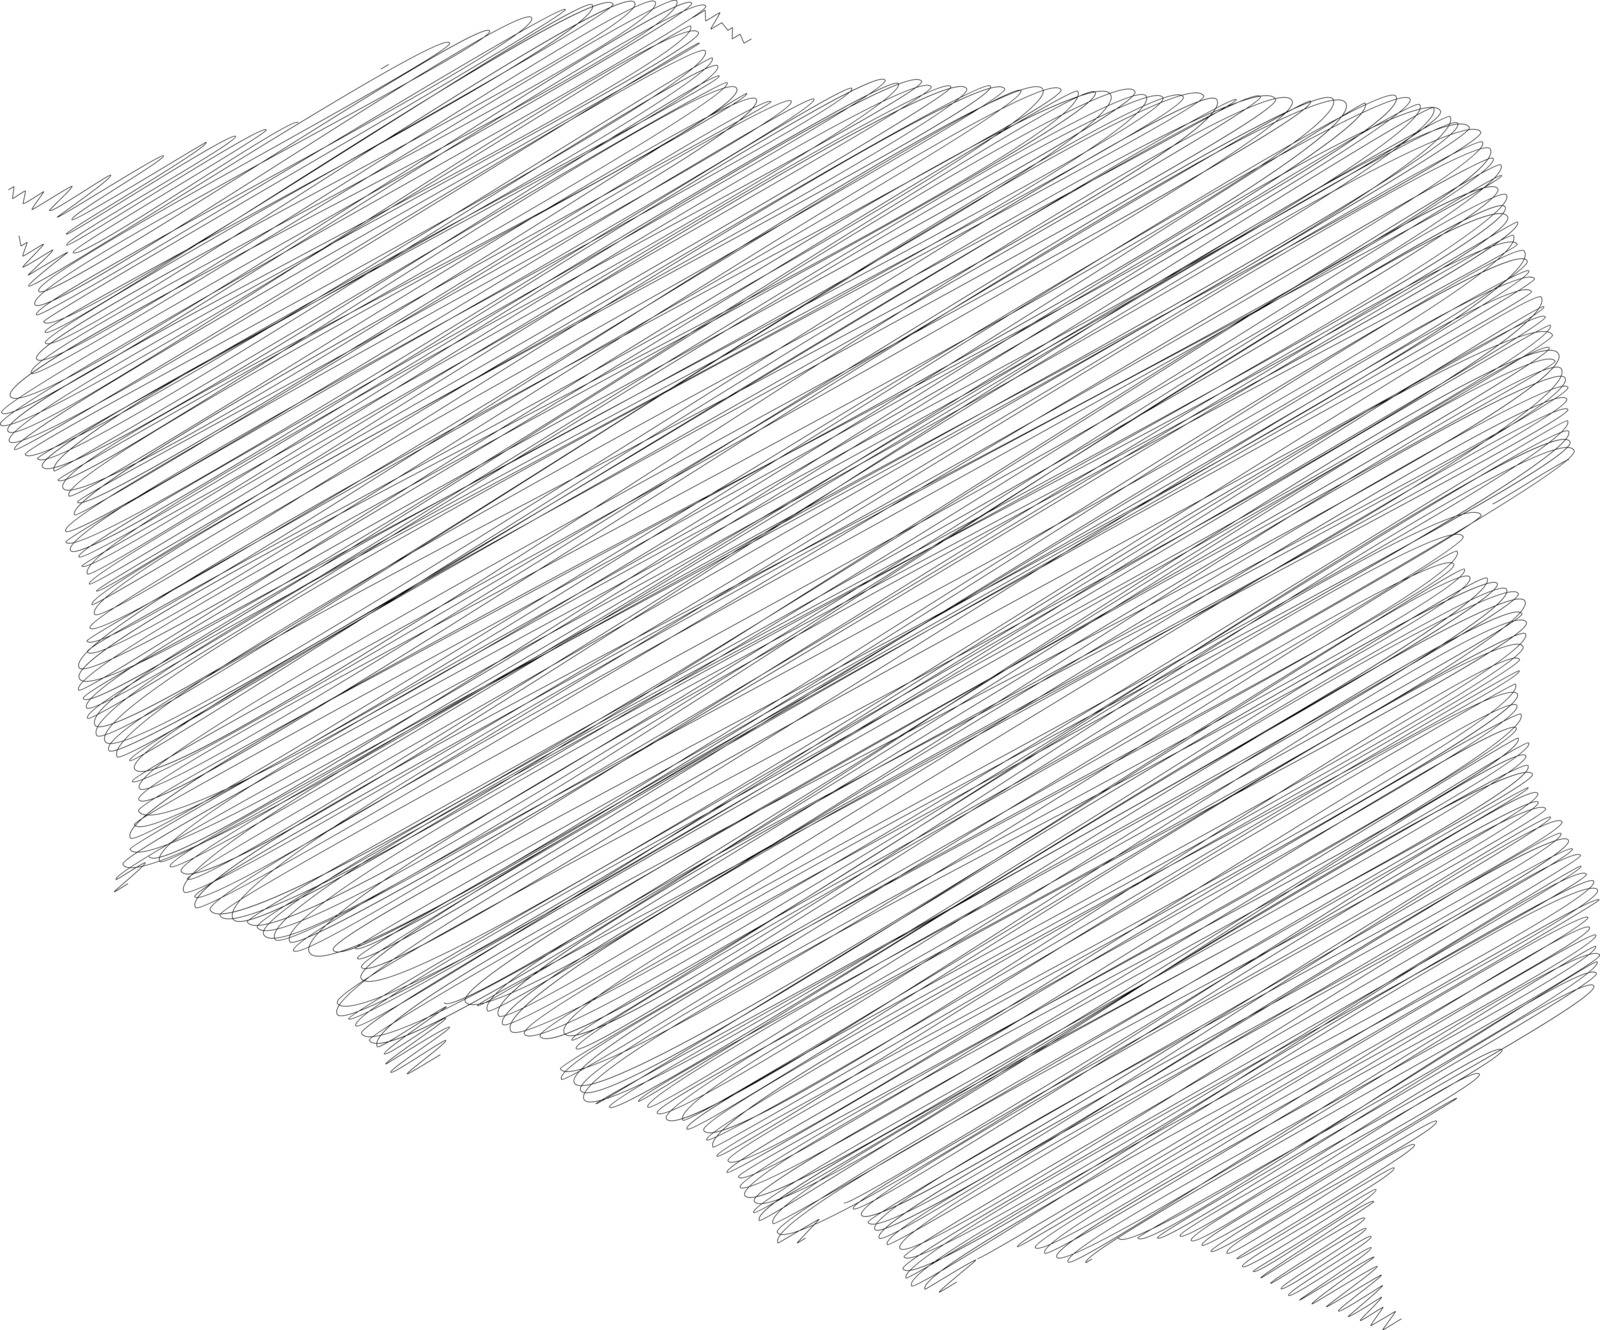 Poland - pencil scribble sketch silhouette map of country area with dropped shadow. Simple flat vector illustration.